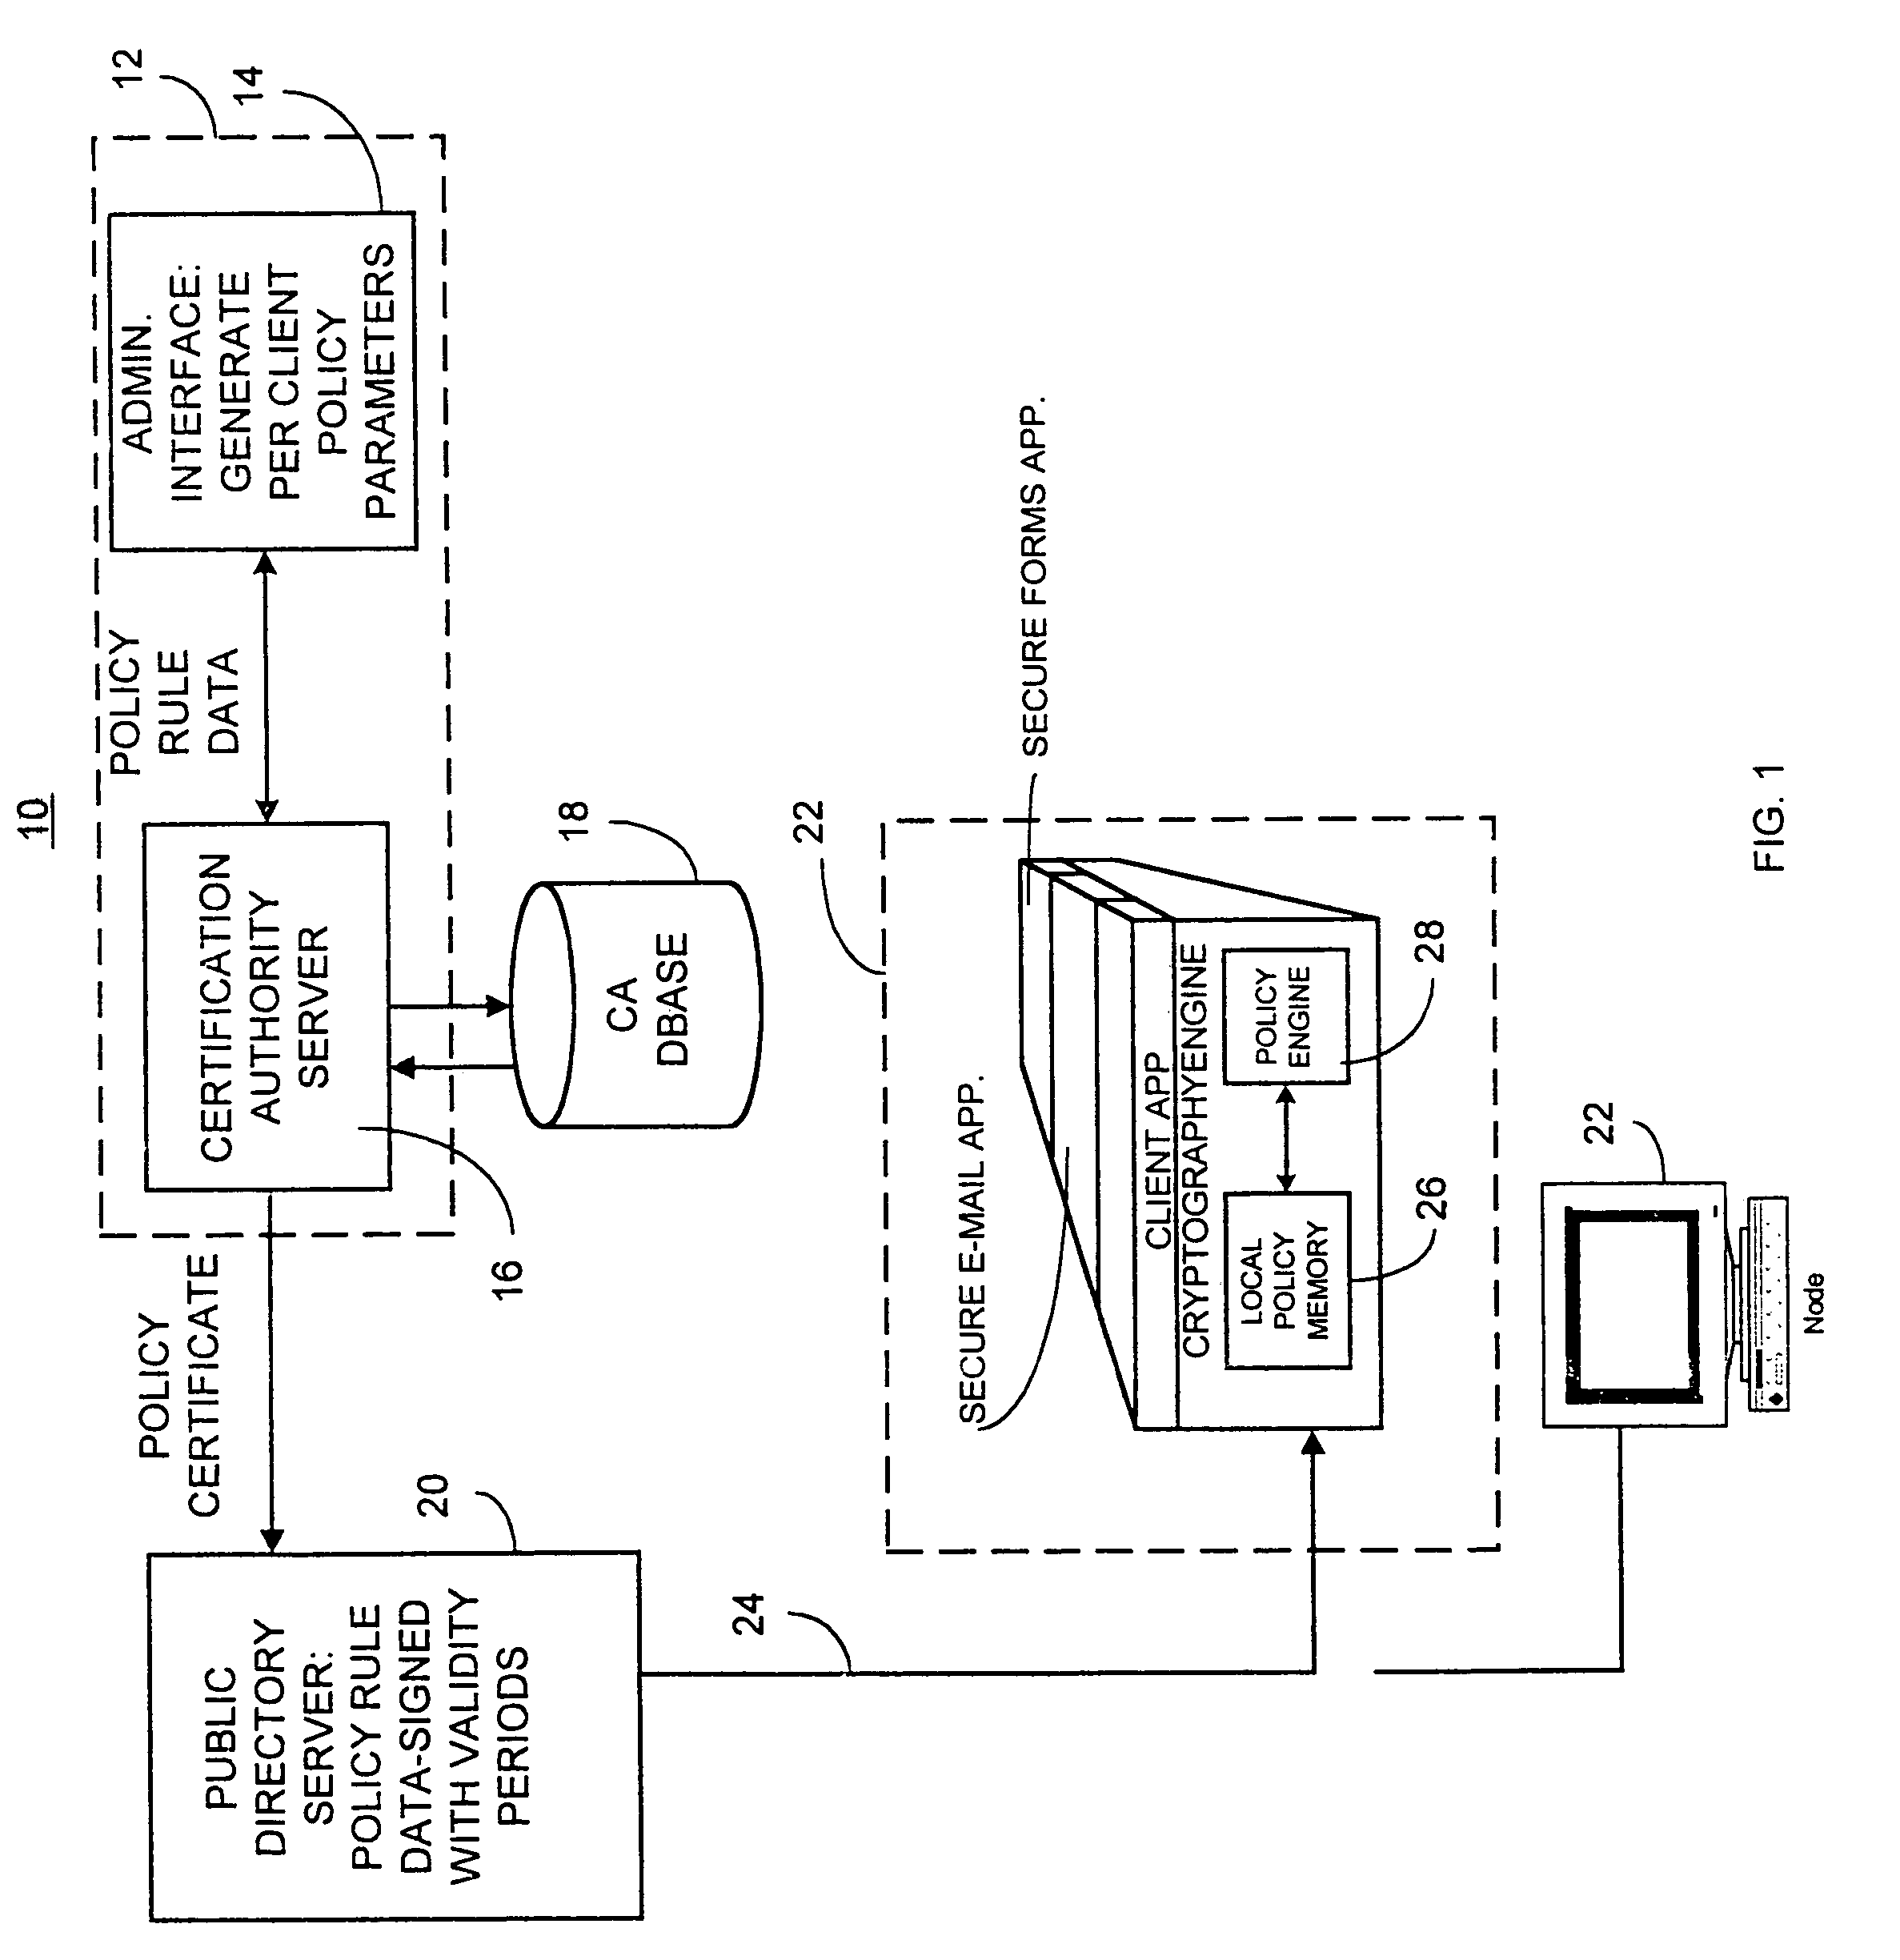 Computer network security system and method having unilateral enforceable security policy provision